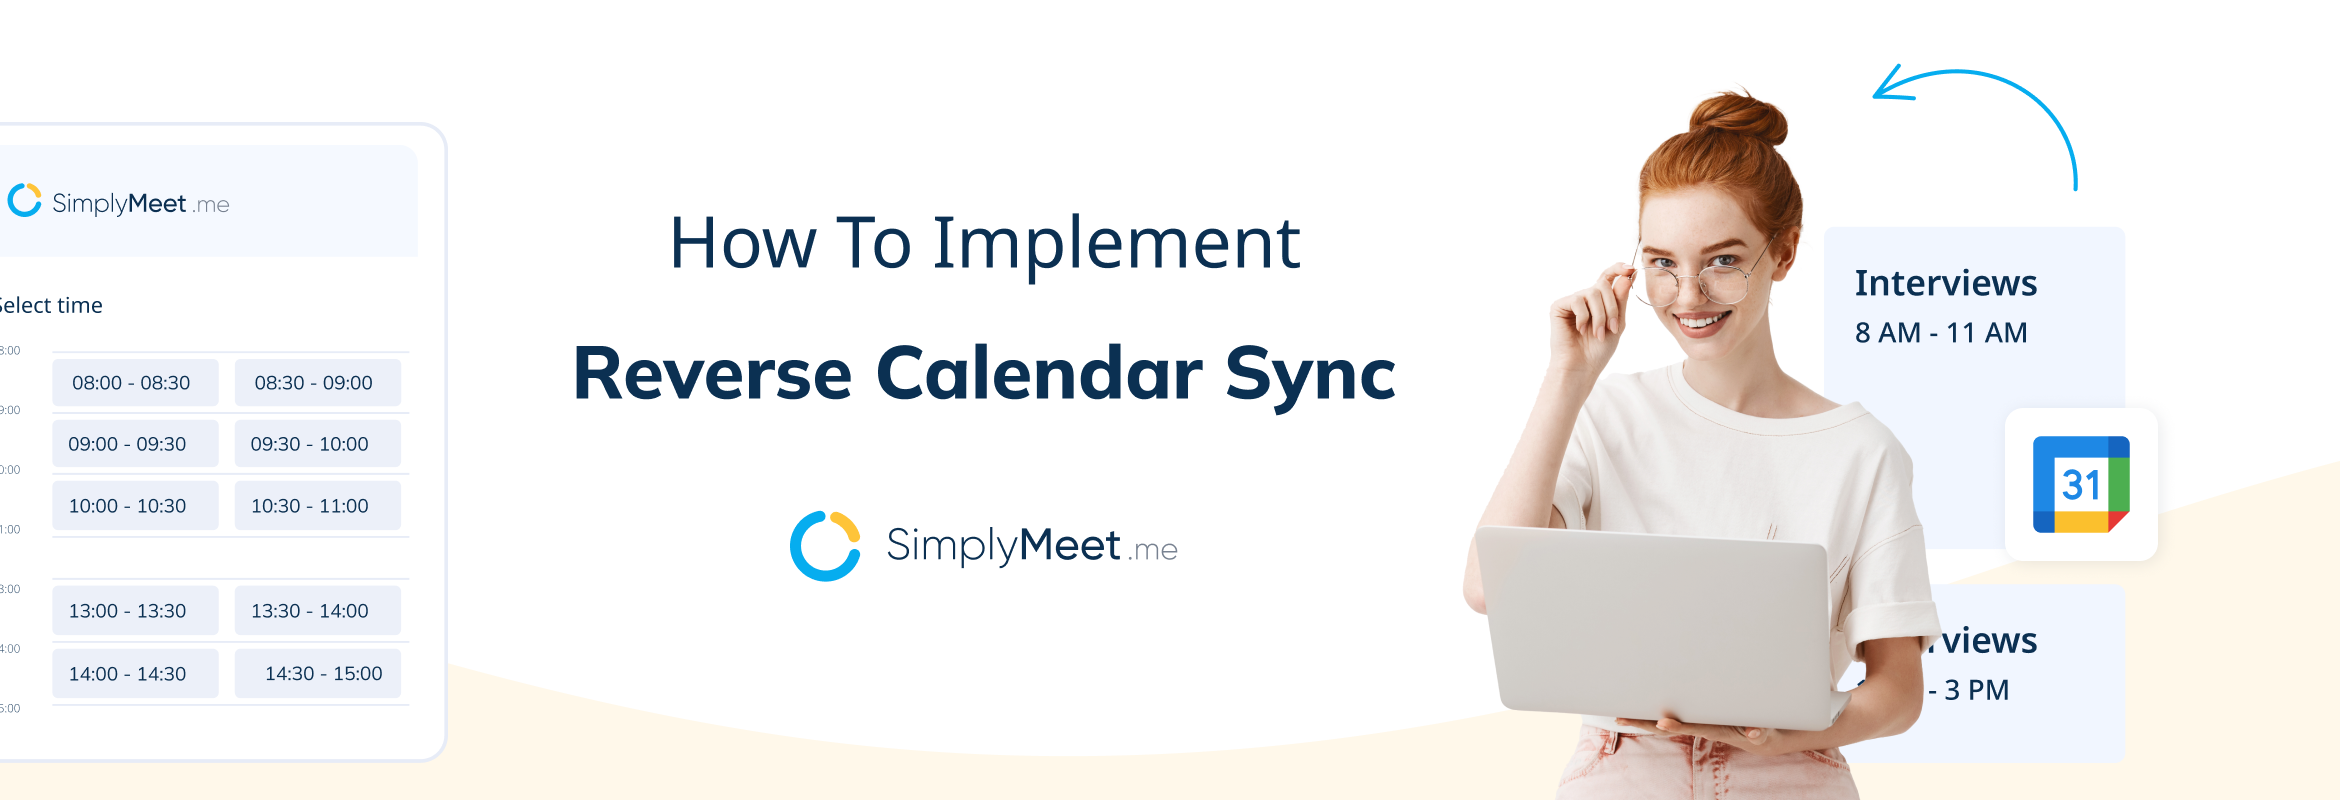 How to implement reverse Calendar Sync with SimplyMeet.me